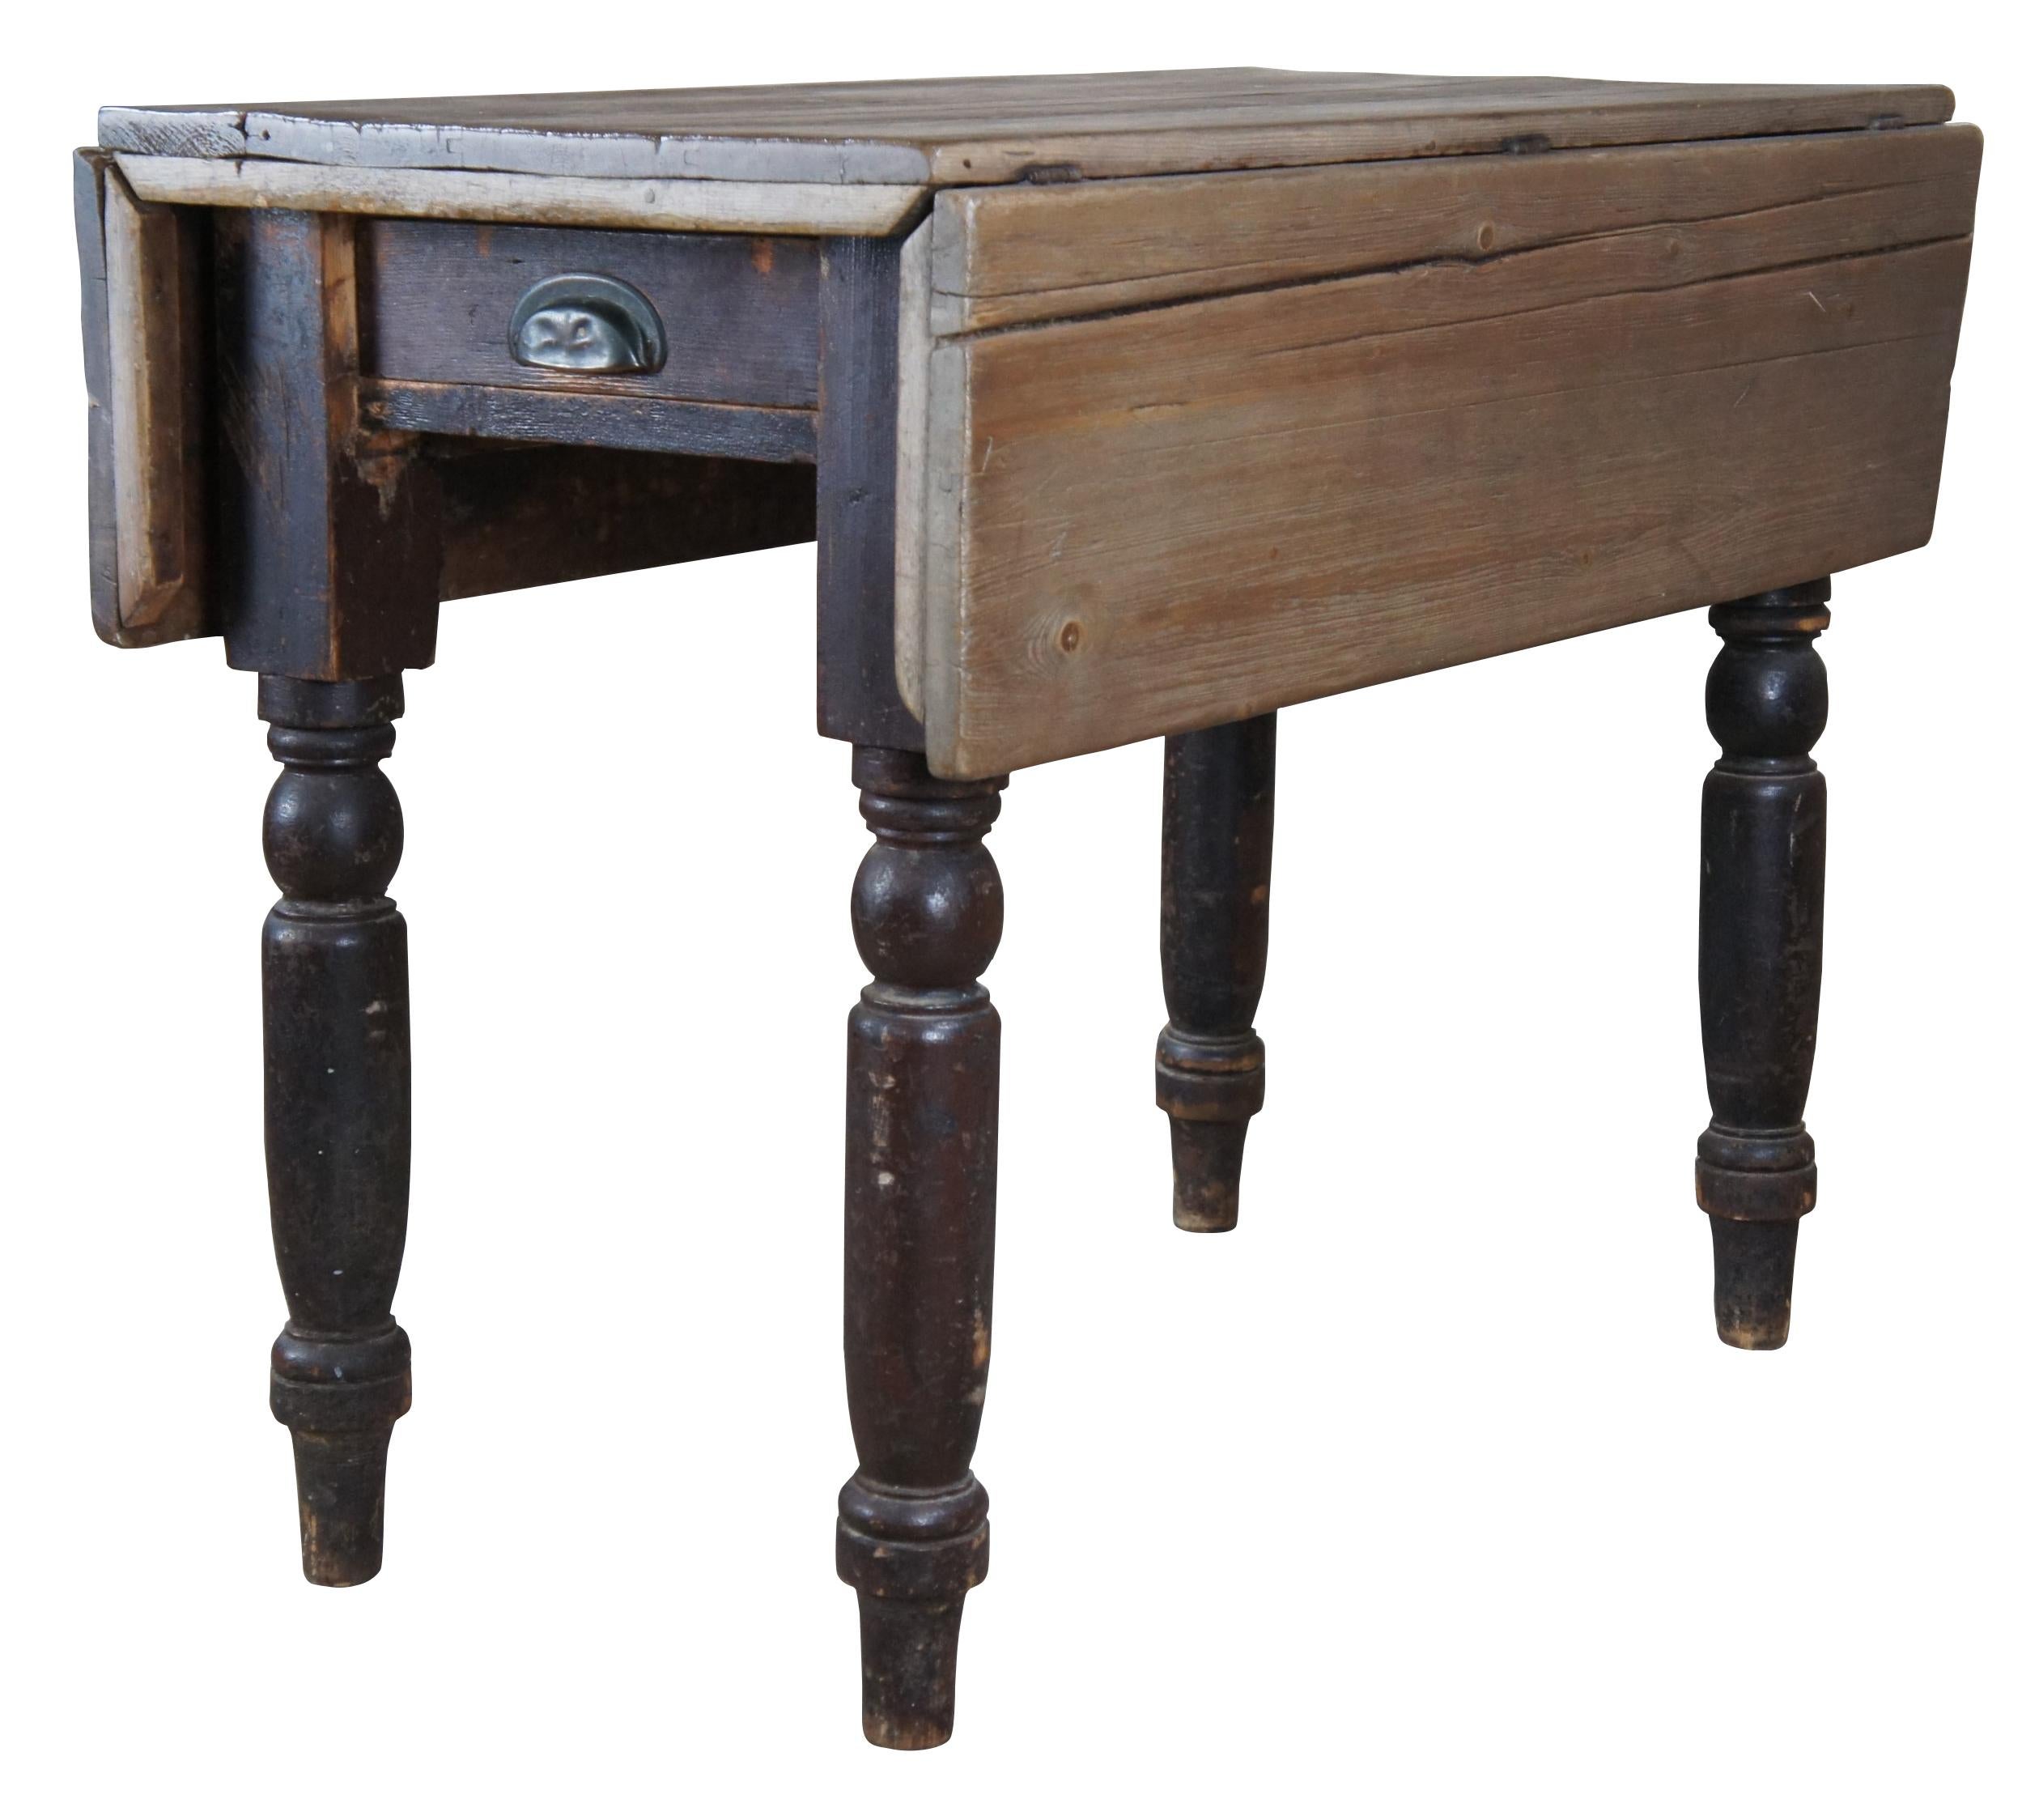 A quaint primitive 19th century English pine farmhouse tavern dropleaf breakfast table or console featuring a rectangular form, central drawer and turned legs. Leafs are supported by iron fold outs. 

37.5